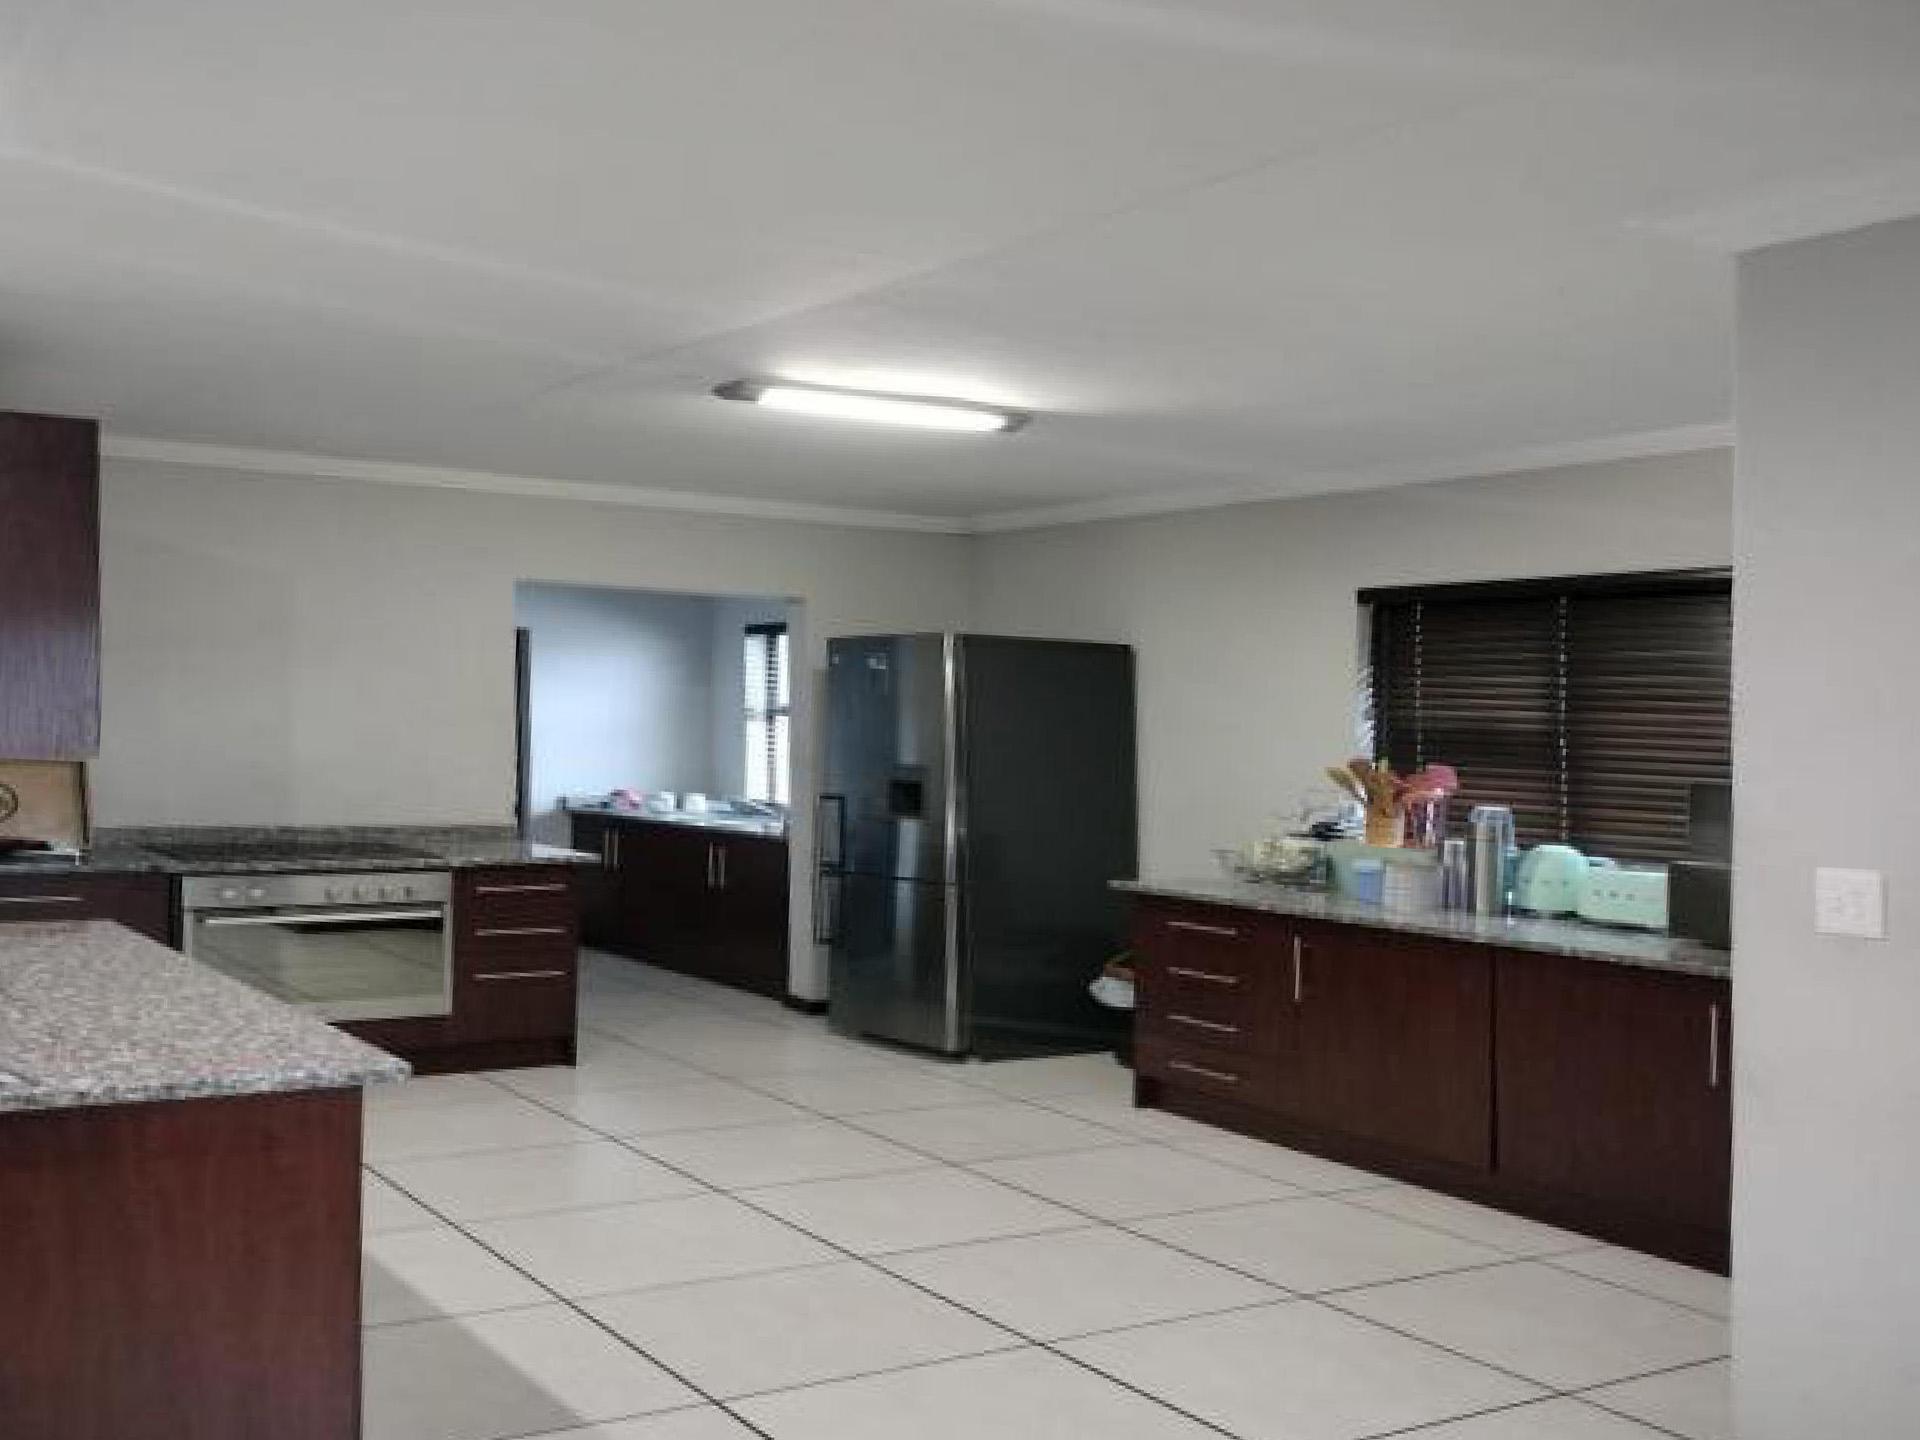 Kitchen of property in Drum Rock